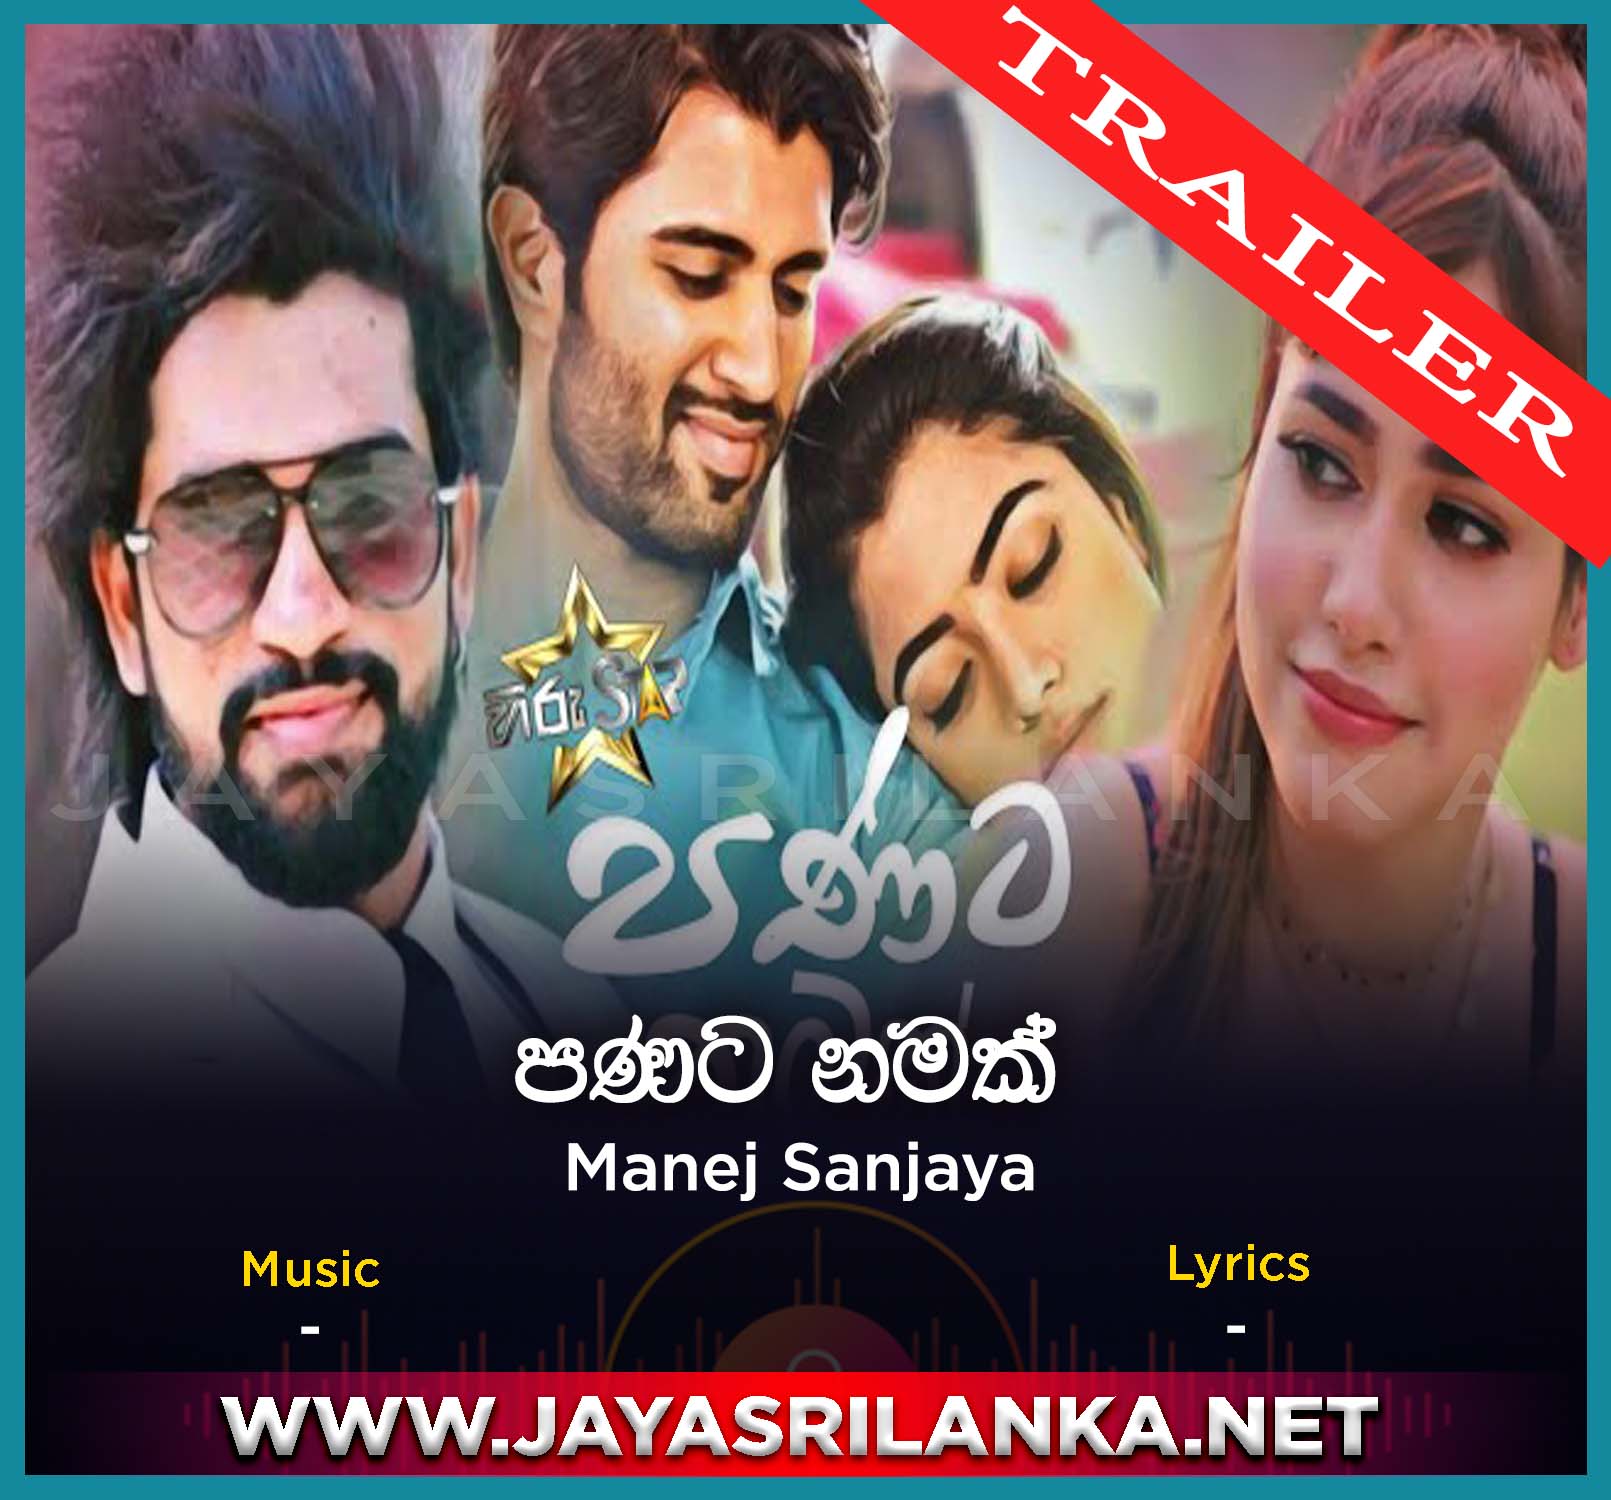 Mp4 songs download mp3 free PagalWorld Movies